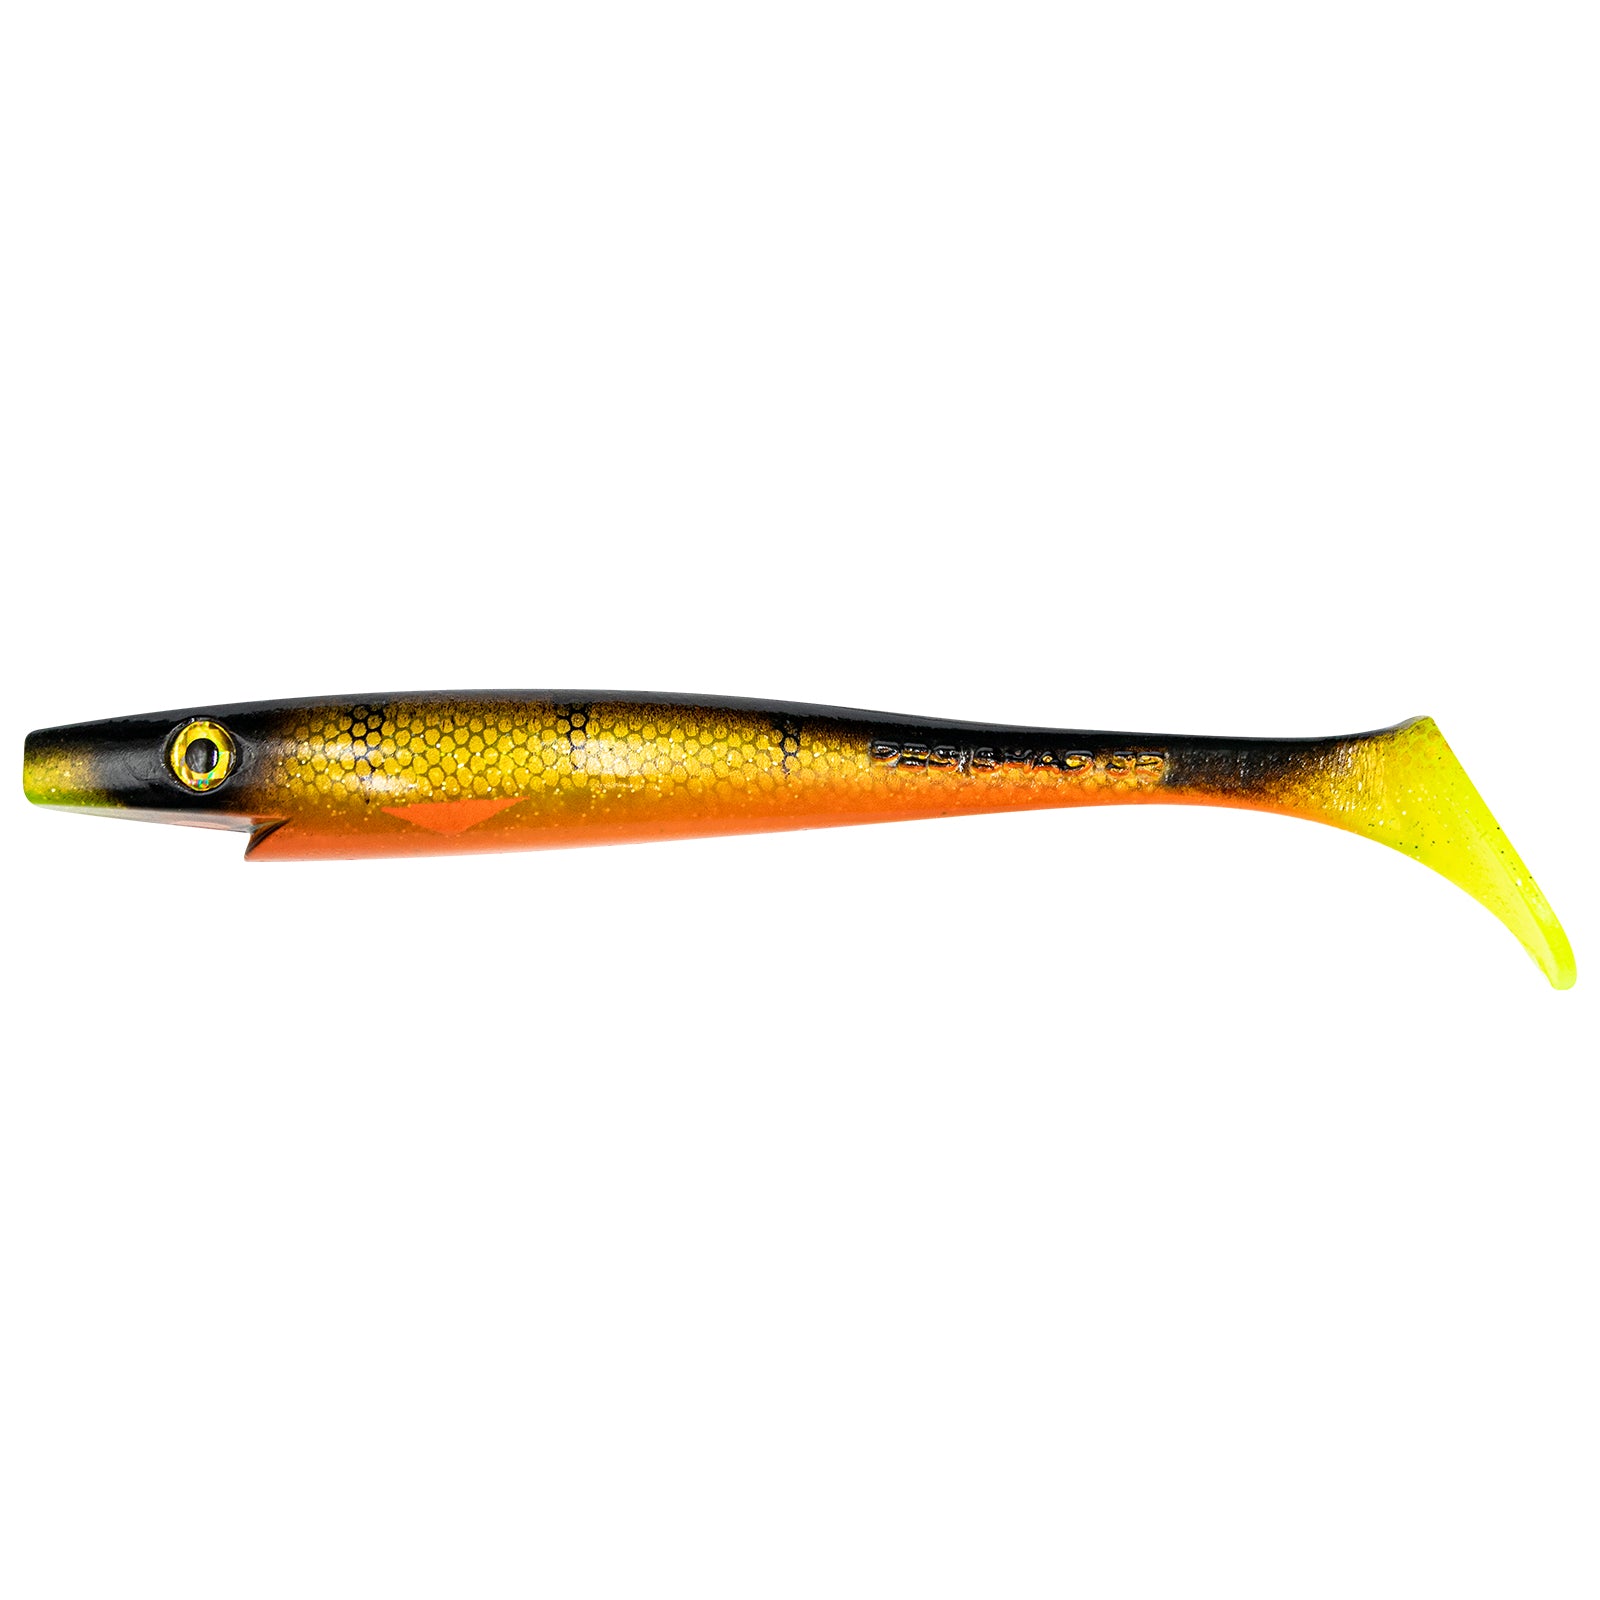 Strike Pro The Pig Shad 9 23 cm Natural Perch HB Edition